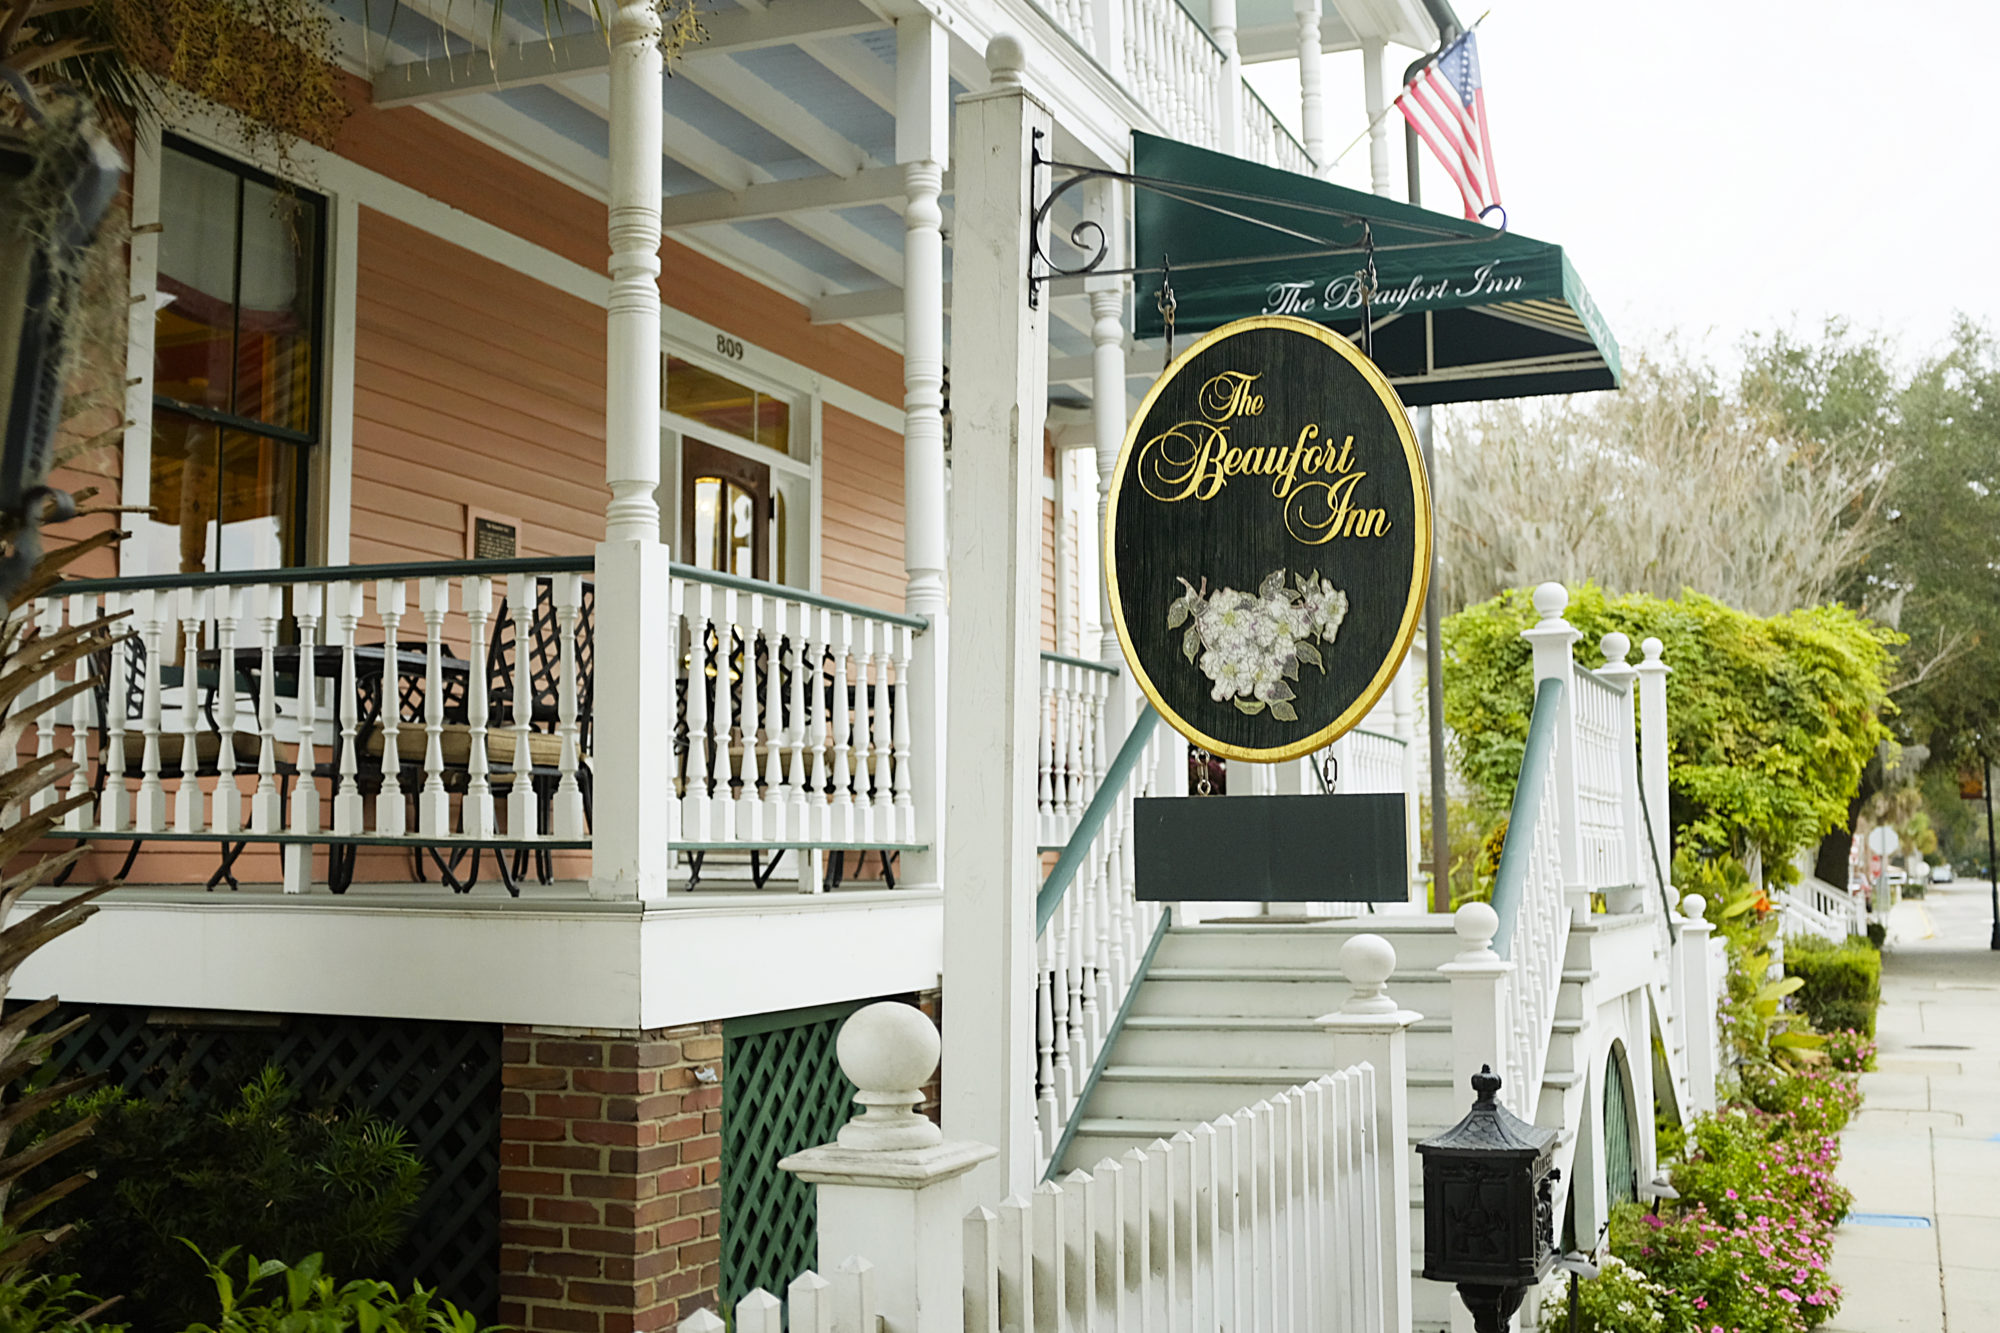 View of the porch and sign at The Beaufort Inn